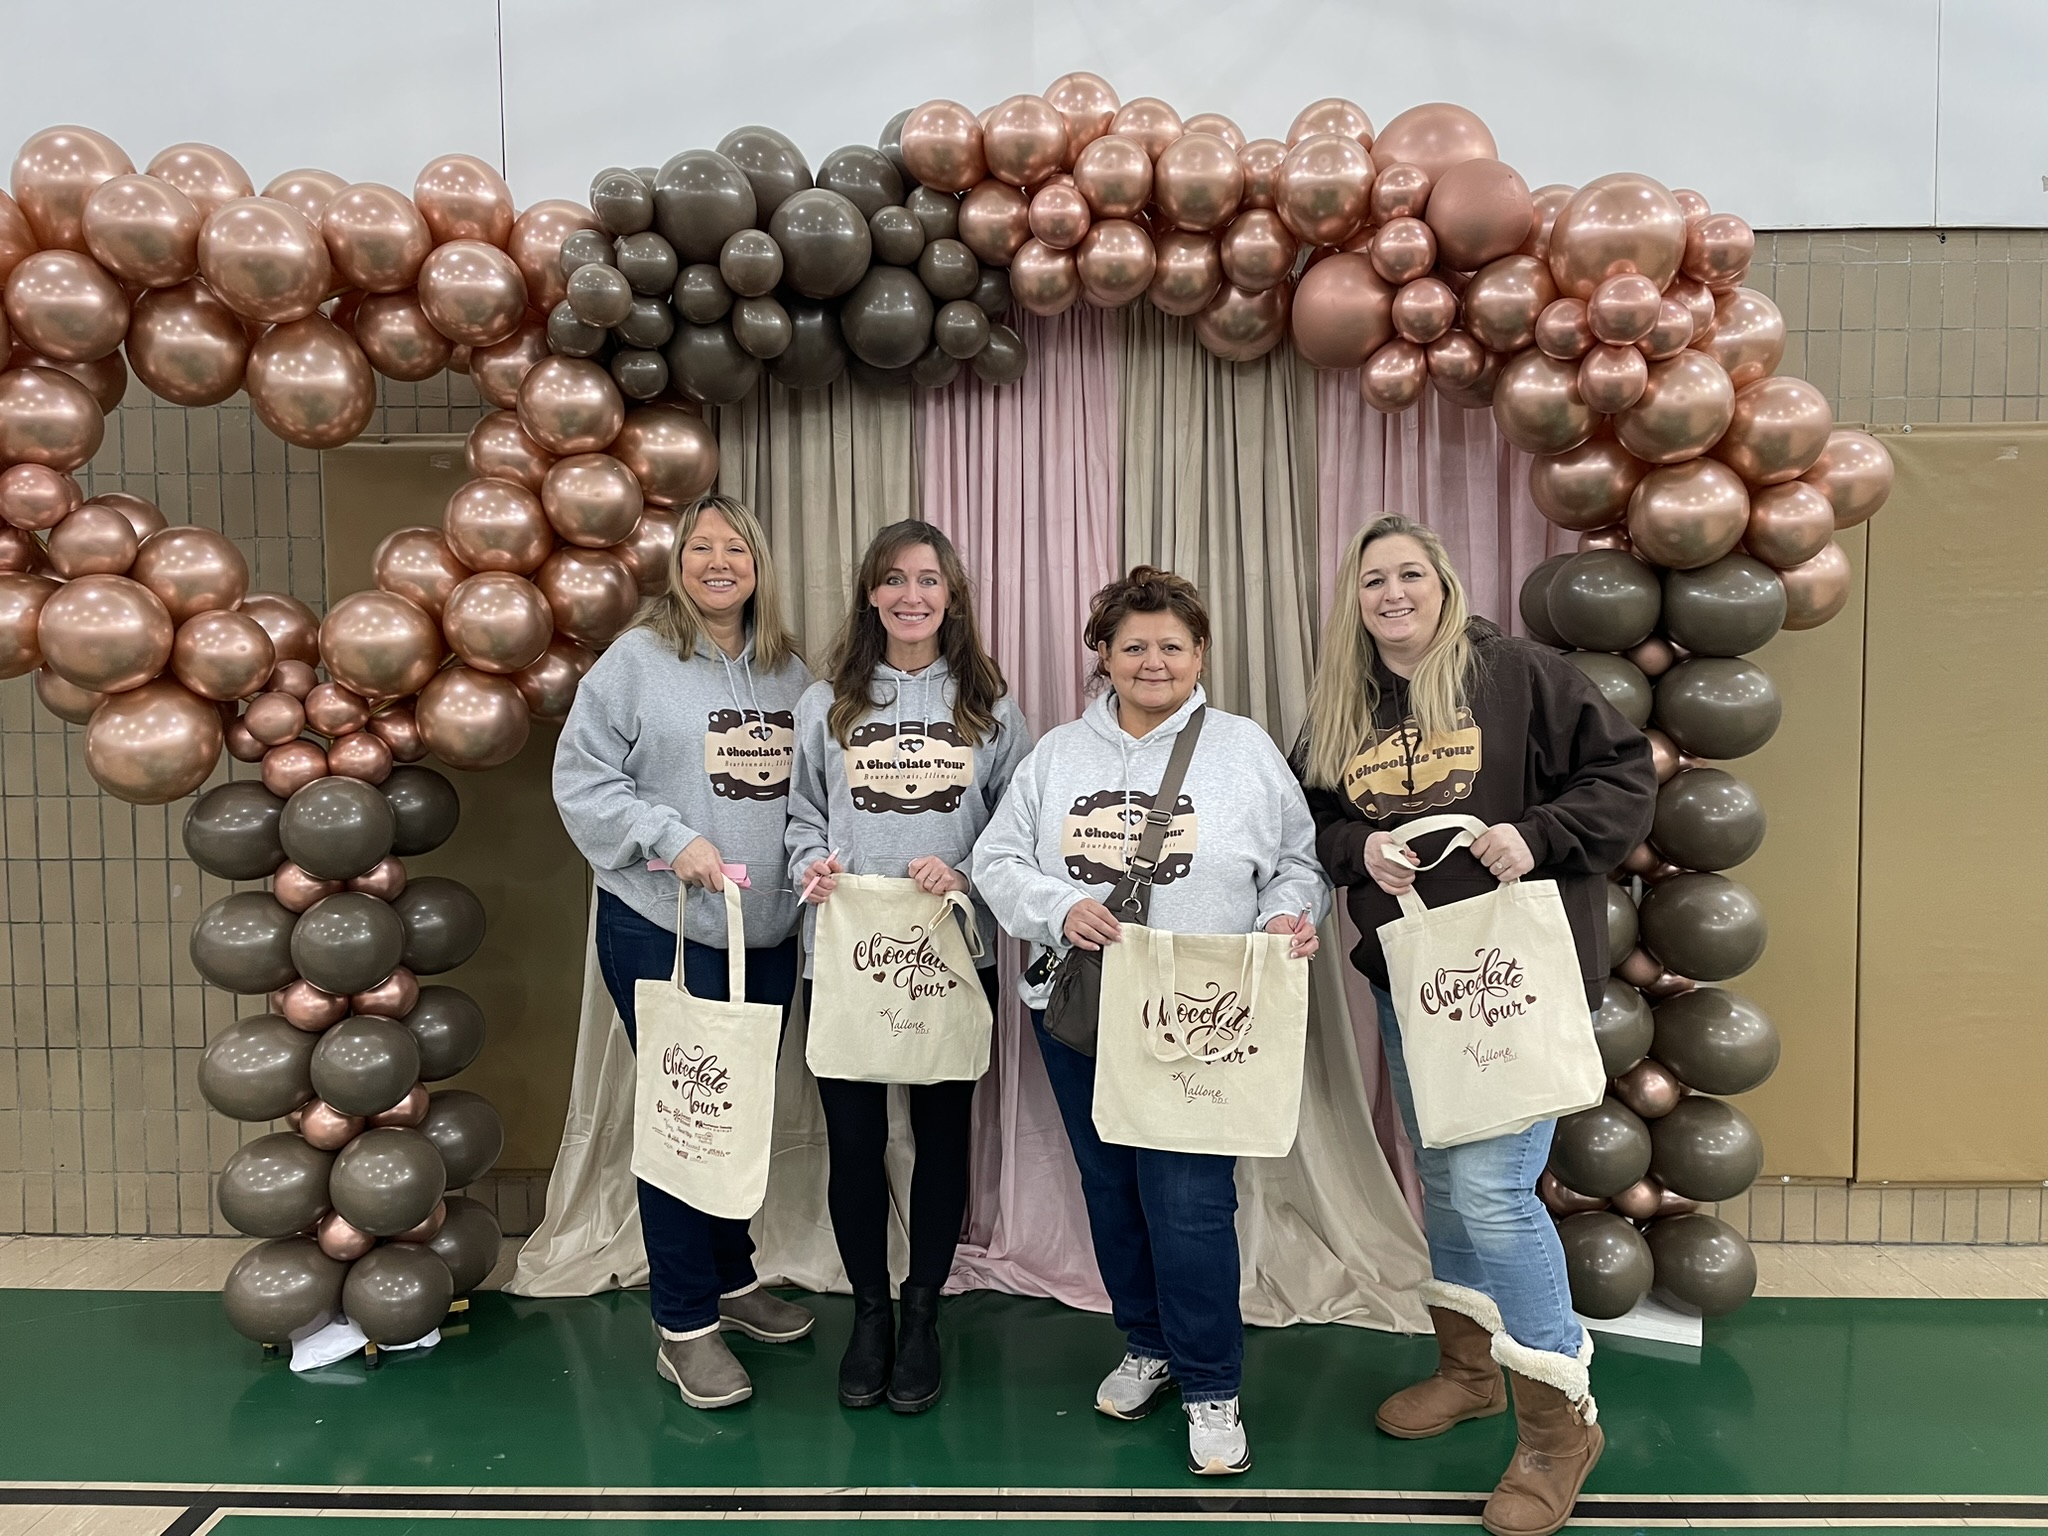 Four women at the chocolate tour under a balloon arch